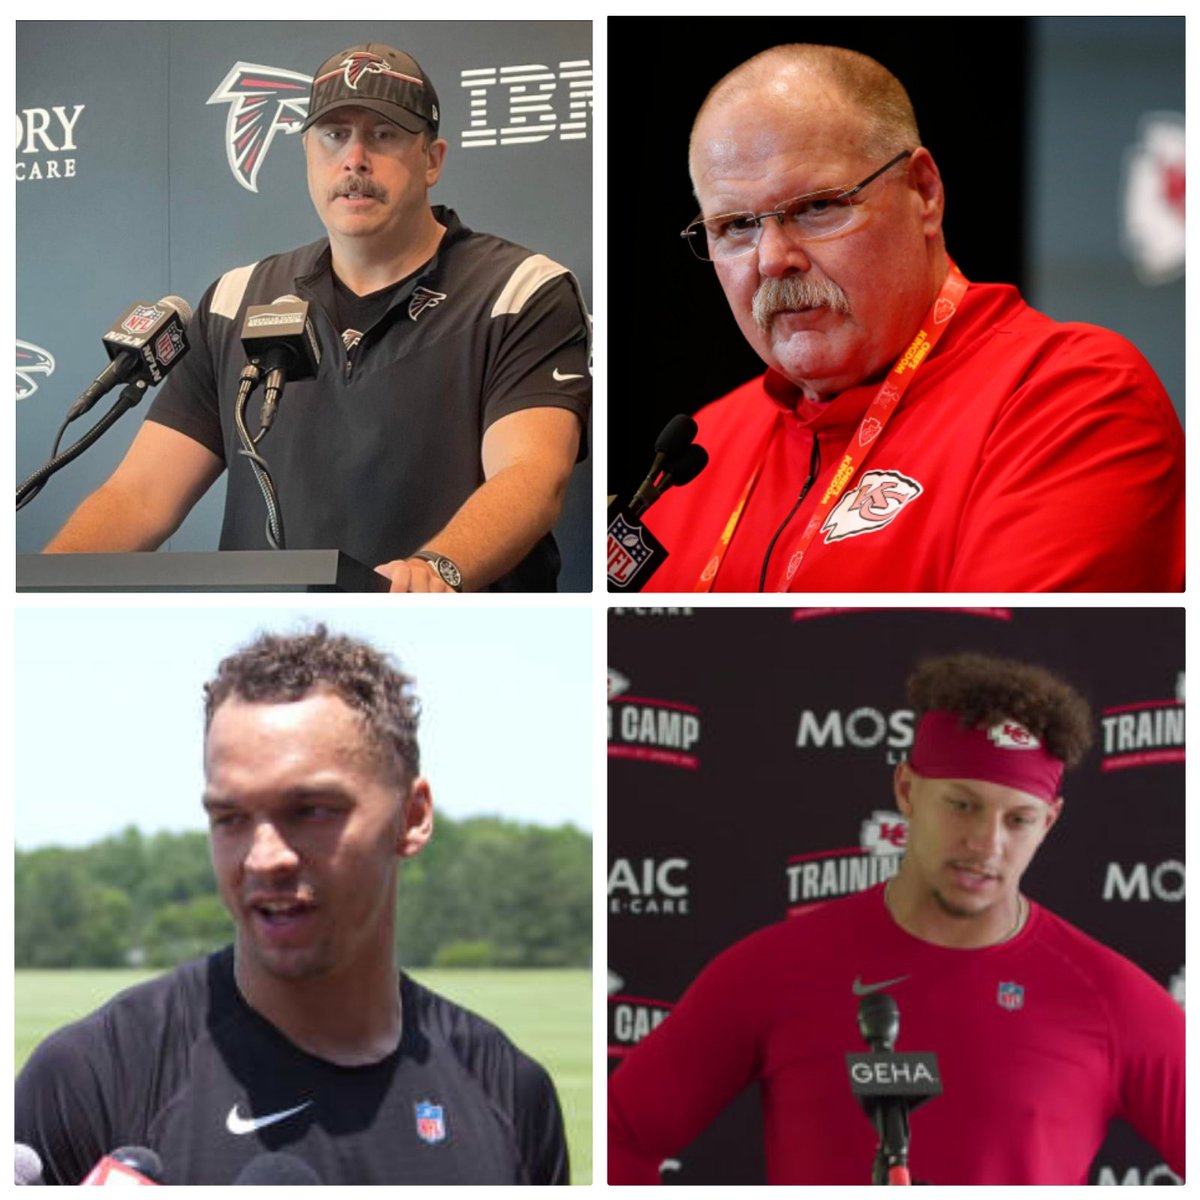 We got Art growing his mustache like Andy and D9 sounding and looking like P15's baby brother...Falcons fans I have a good feeling about this...😆🤣 #atlantafalconsfootball #nflfootballcamp #nflnetwork #goodmoringfootball #nflmemes #superbowlbound #footballseason #espn